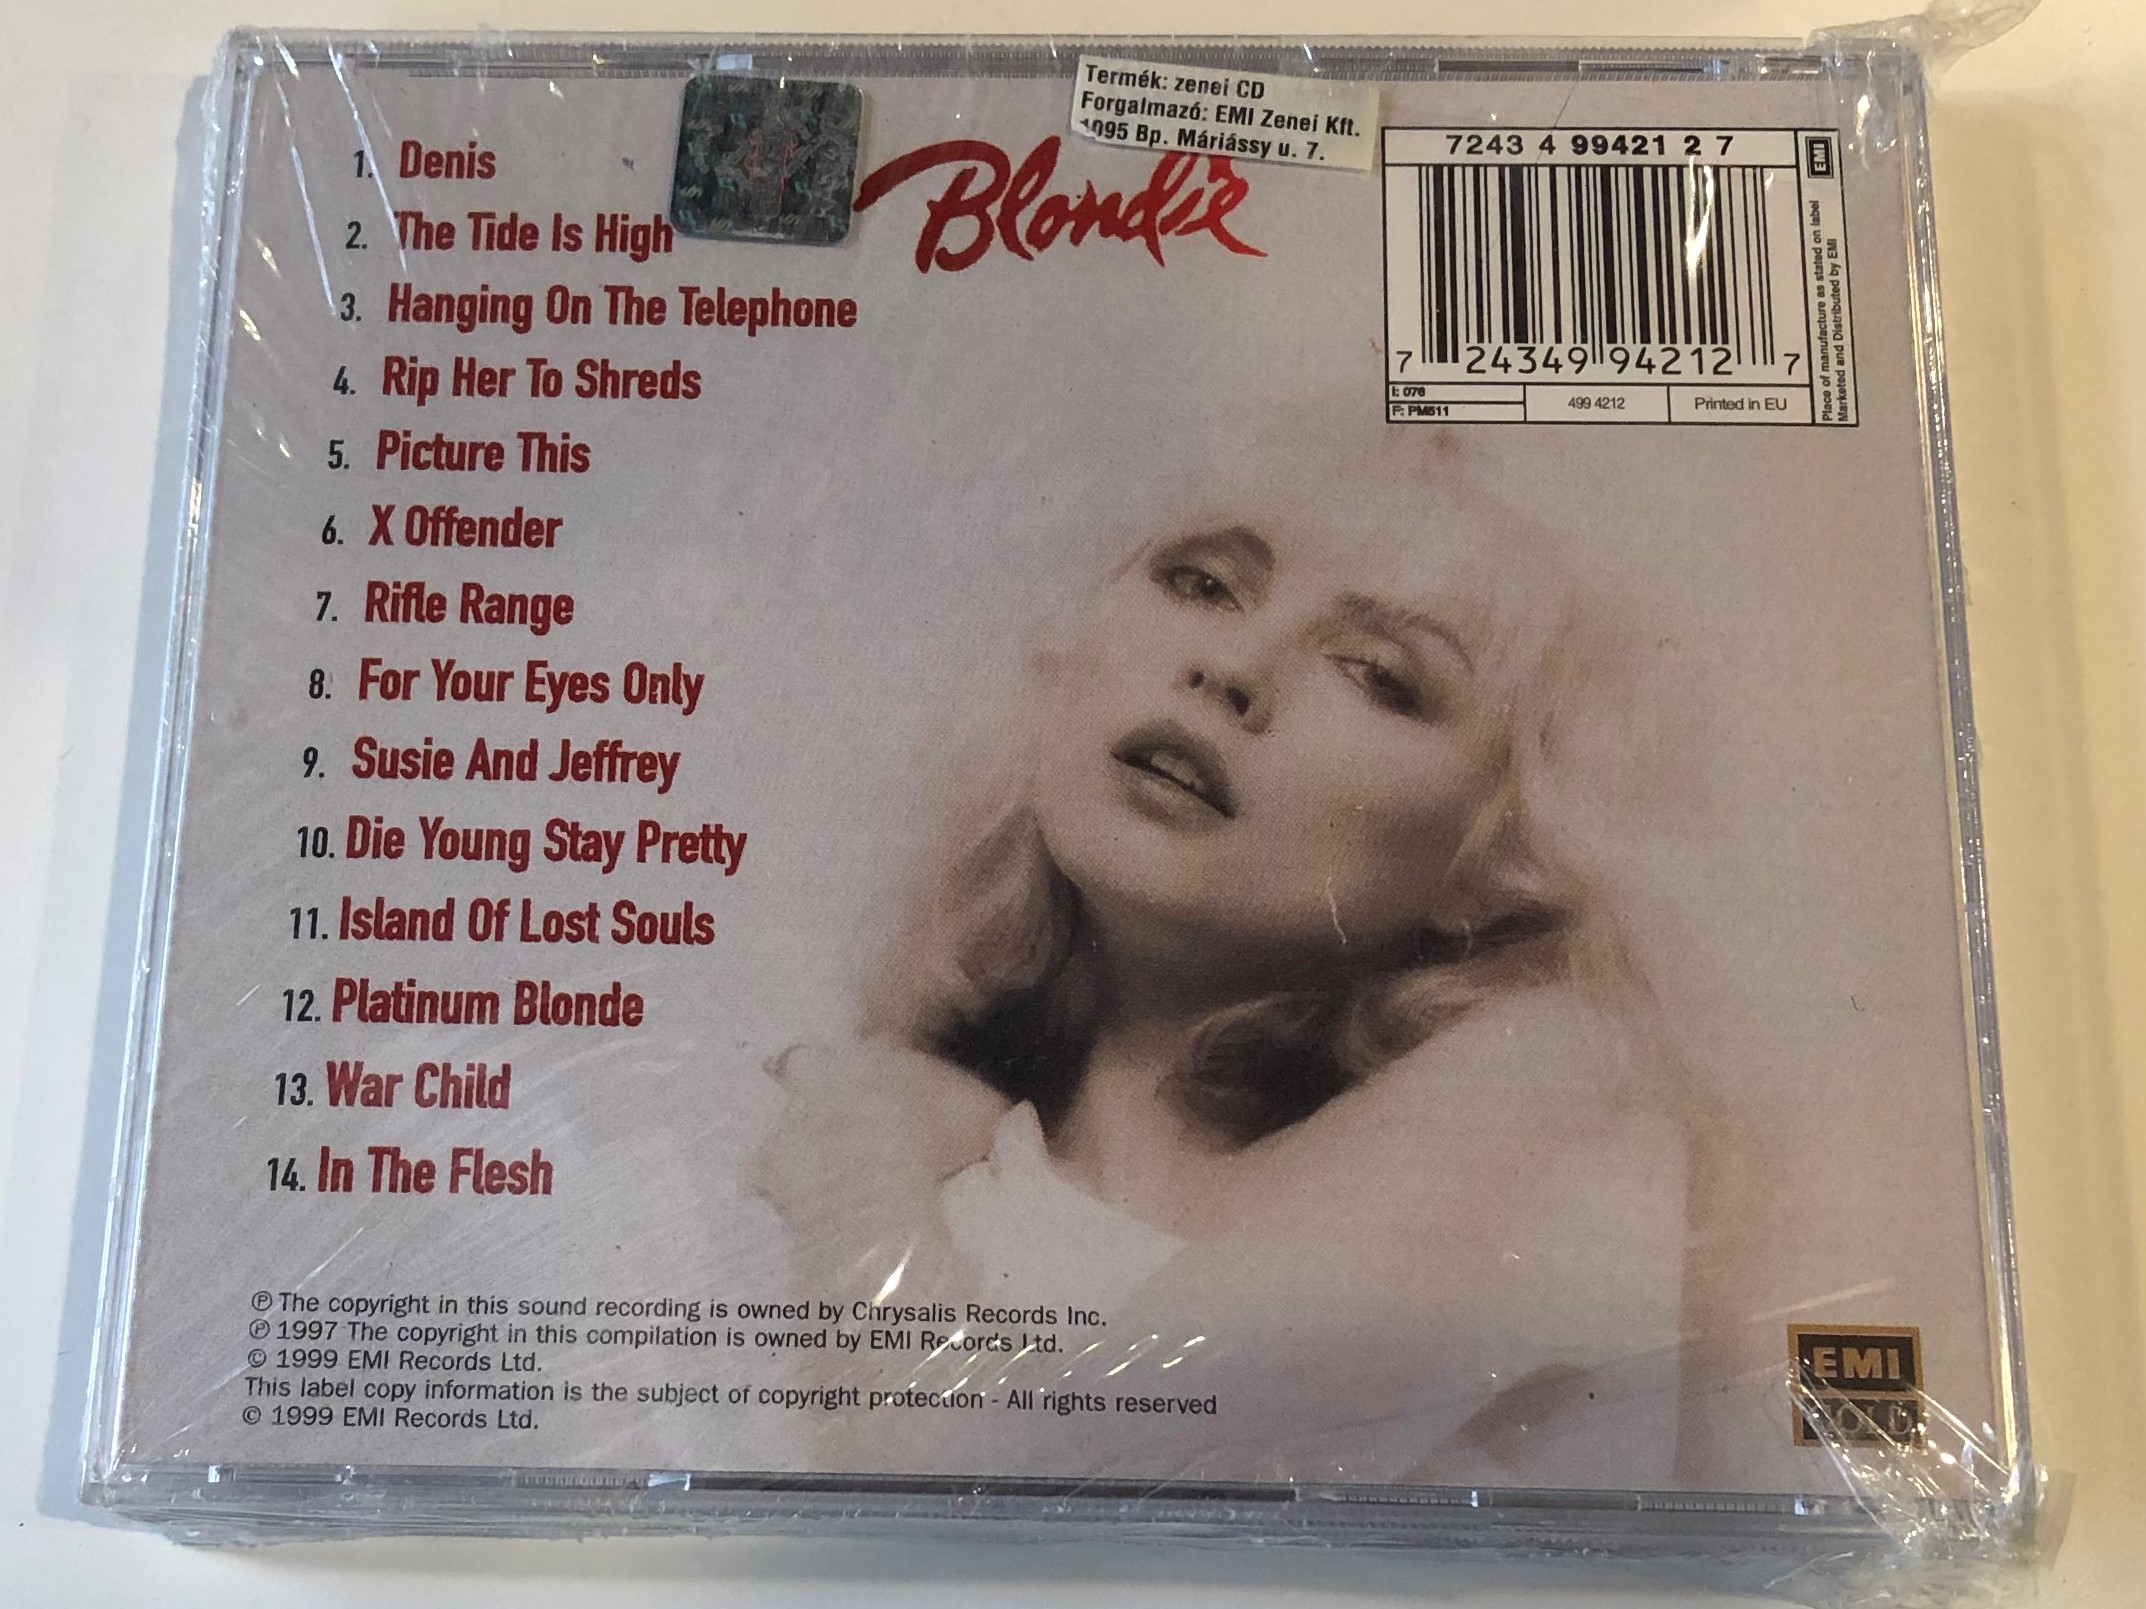 blondie-the-essential-collection-denis-the-tide-is-high-hanging-on-the-telephone-picture-this-island-of-lost-souls-emi-gold-audio-cd-1999-724349942127-2-.jpg